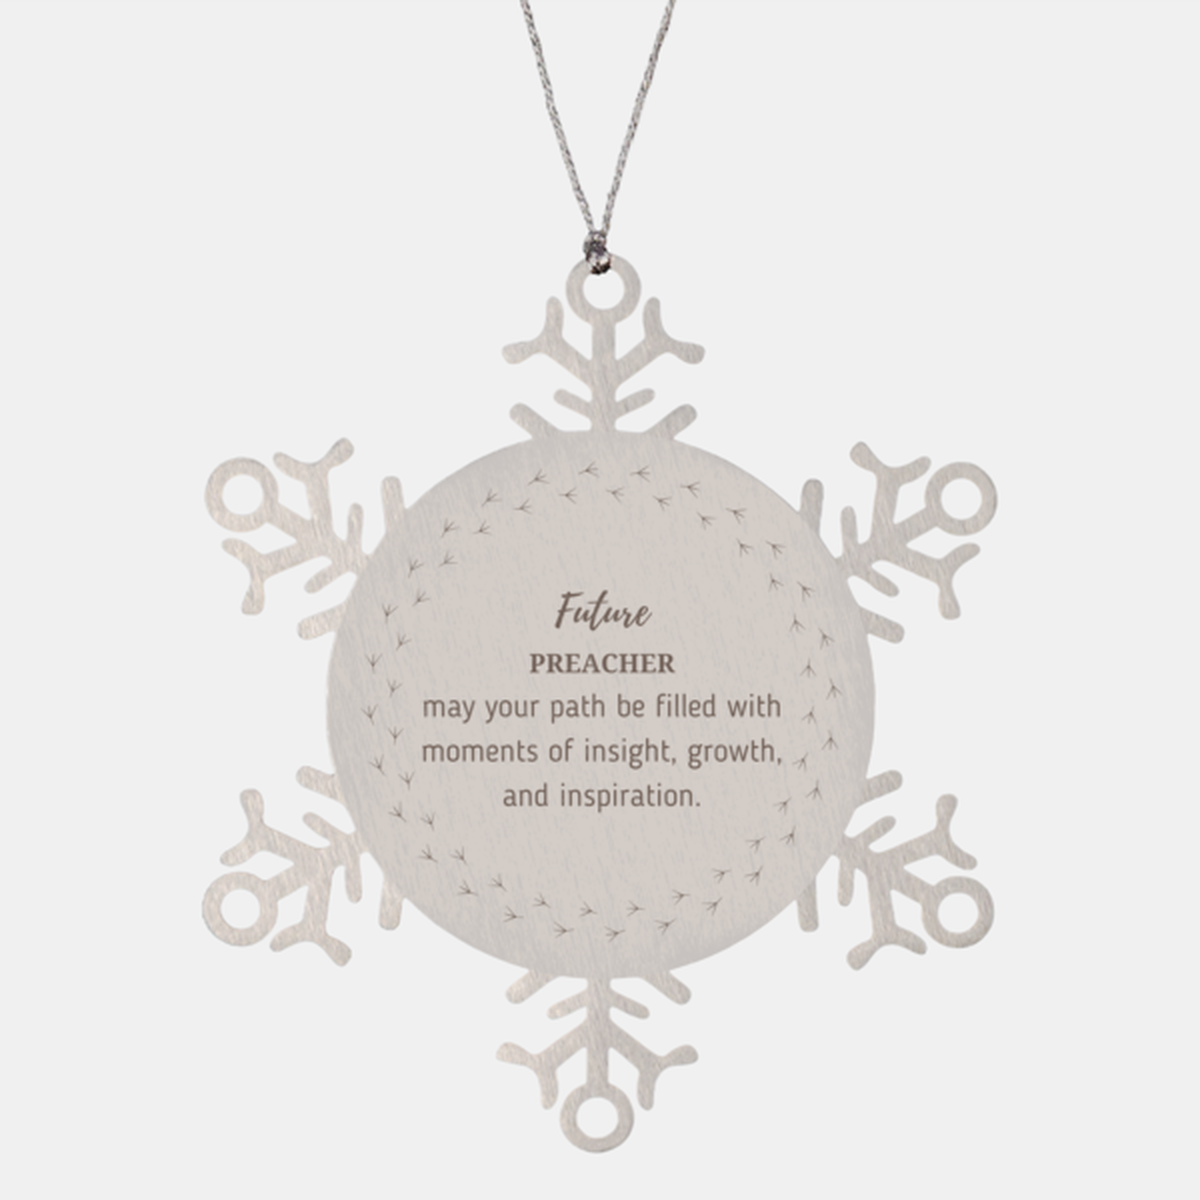 Future Preacher Gifts, May your path be filled with moments of insight, Graduation Gifts for New Preacher, Christmas Unique Snowflake Ornament For Men, Women, Friends